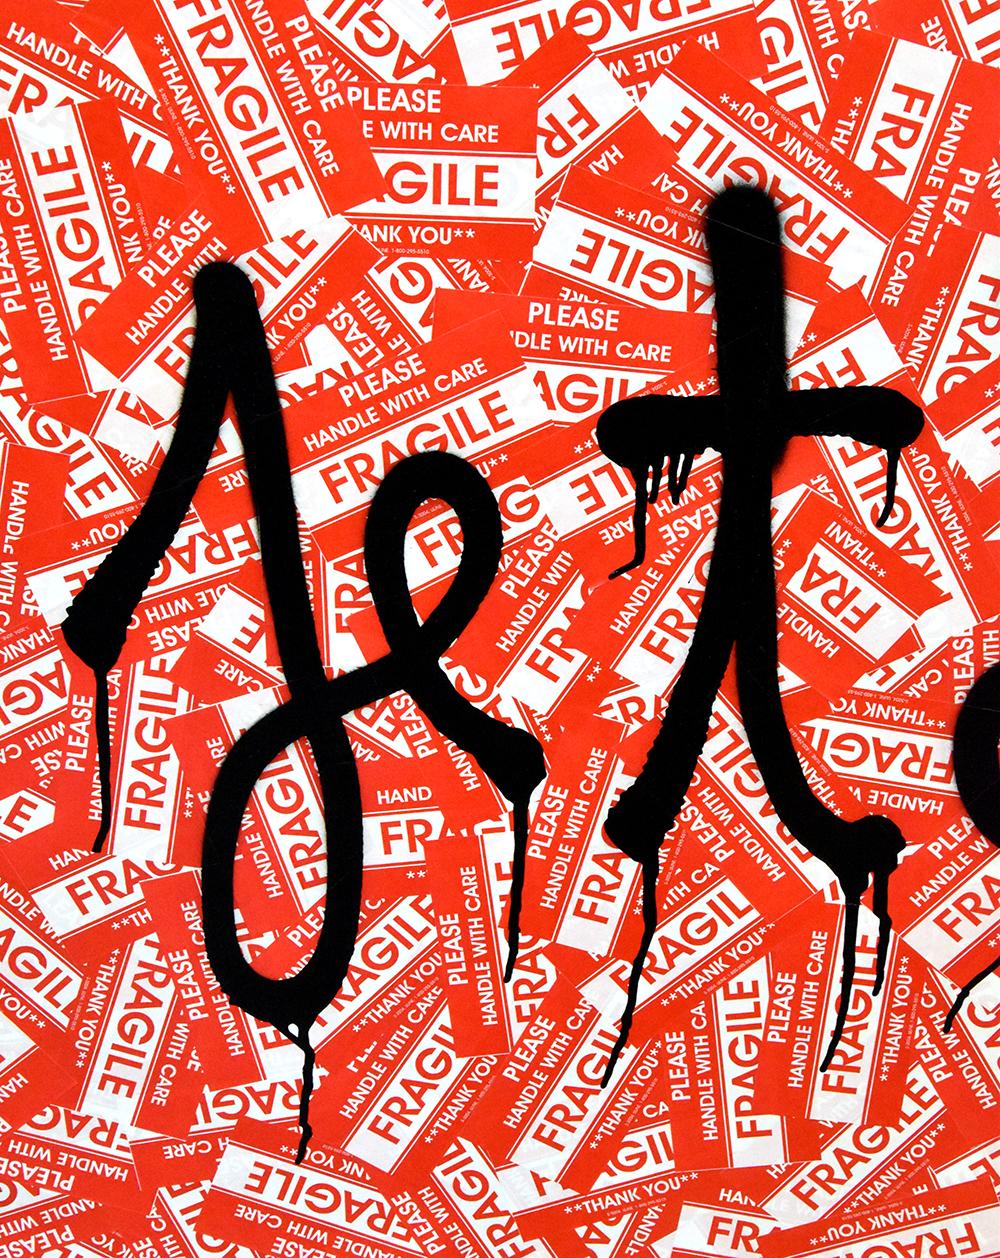 Created in 2018, this spray paint and stickers on plywood is hand-signed by Mr. Brainwash (Garges-lès-Gonesse 1966 -) in ink. This is a unique and original work.

Catalogue Raisonné & COA:
Mr. Brainwash Je t'aime, 2018 is fully documented and